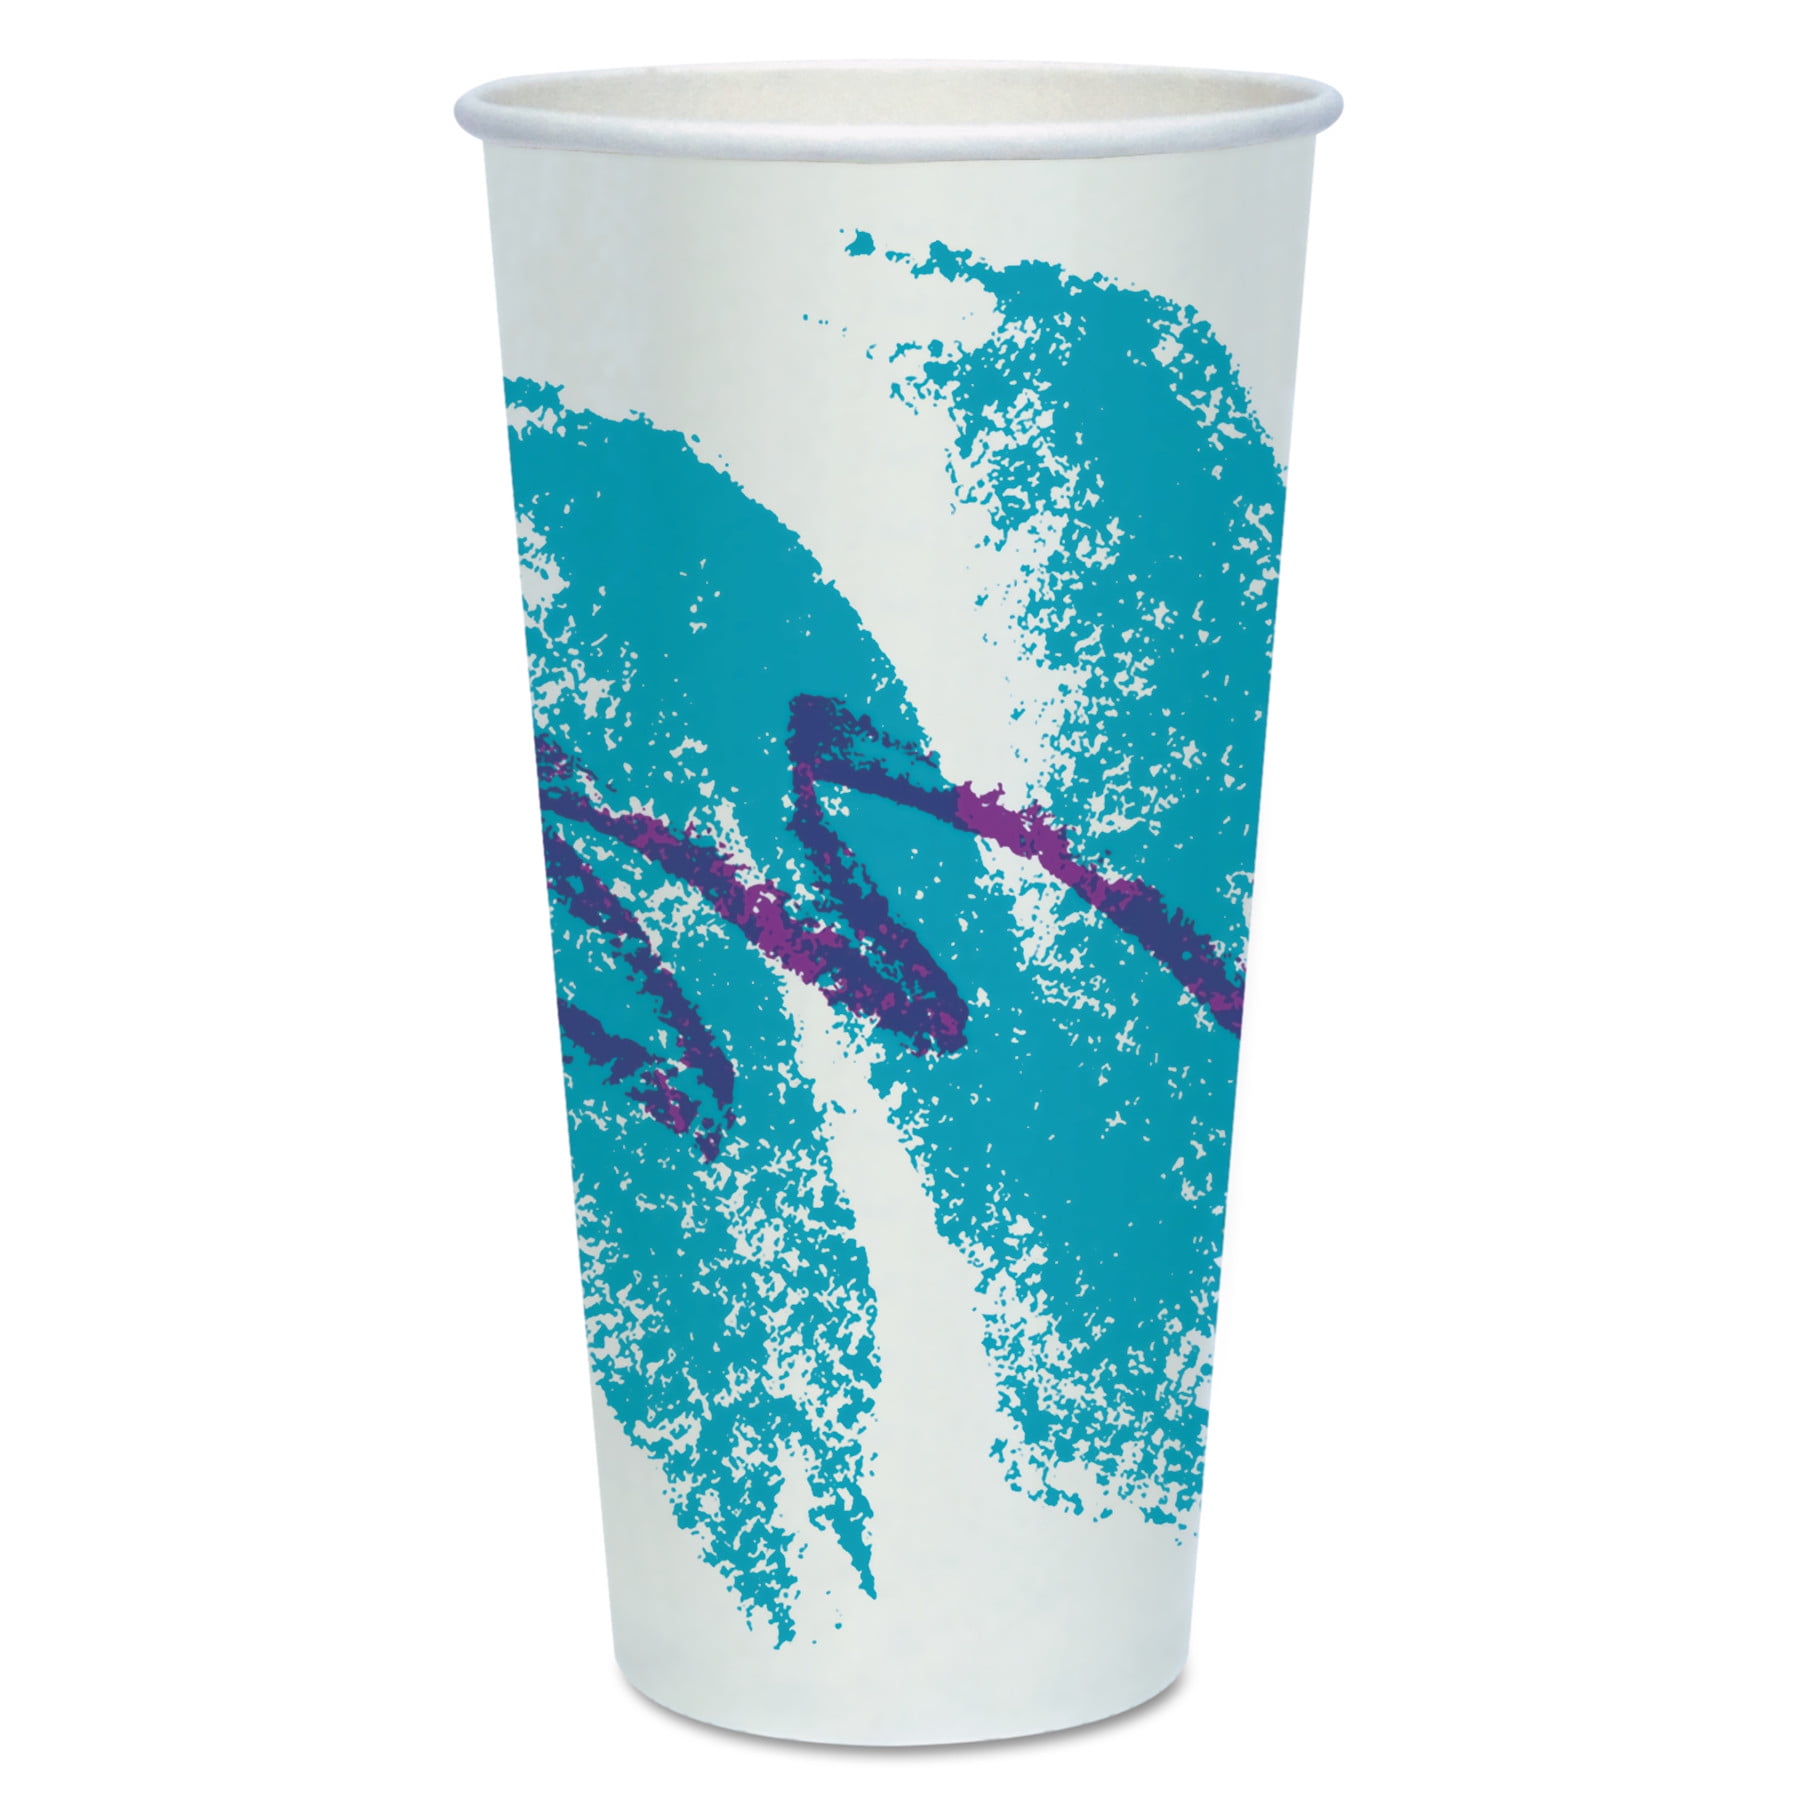 Cold cups